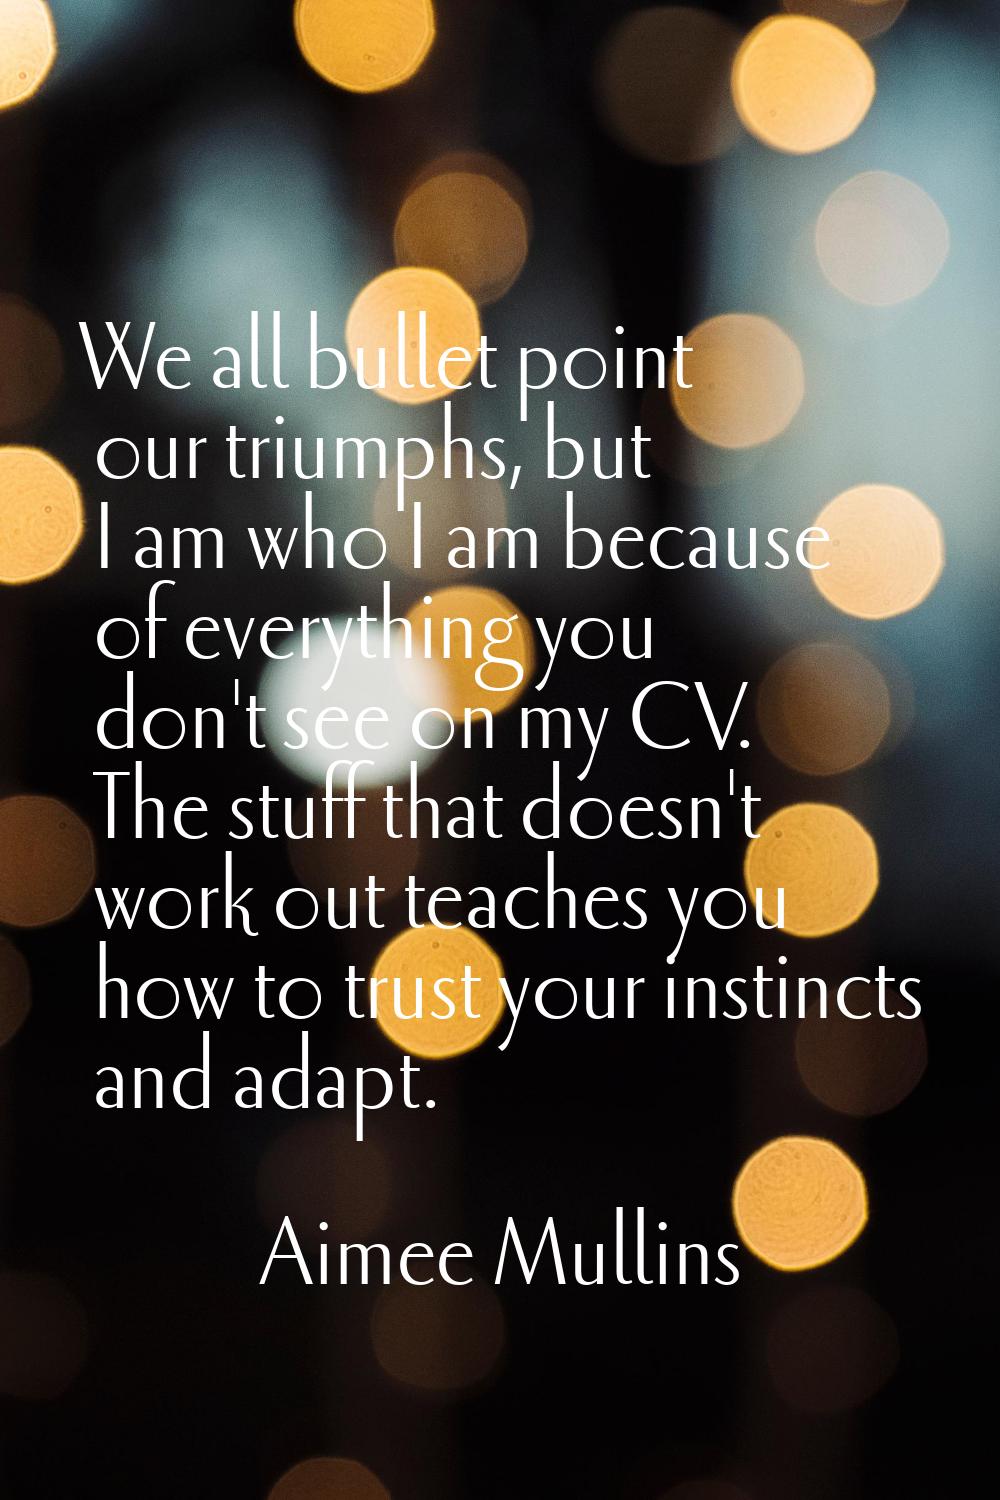 We all bullet point our triumphs, but I am who I am because of everything you don't see on my CV. T